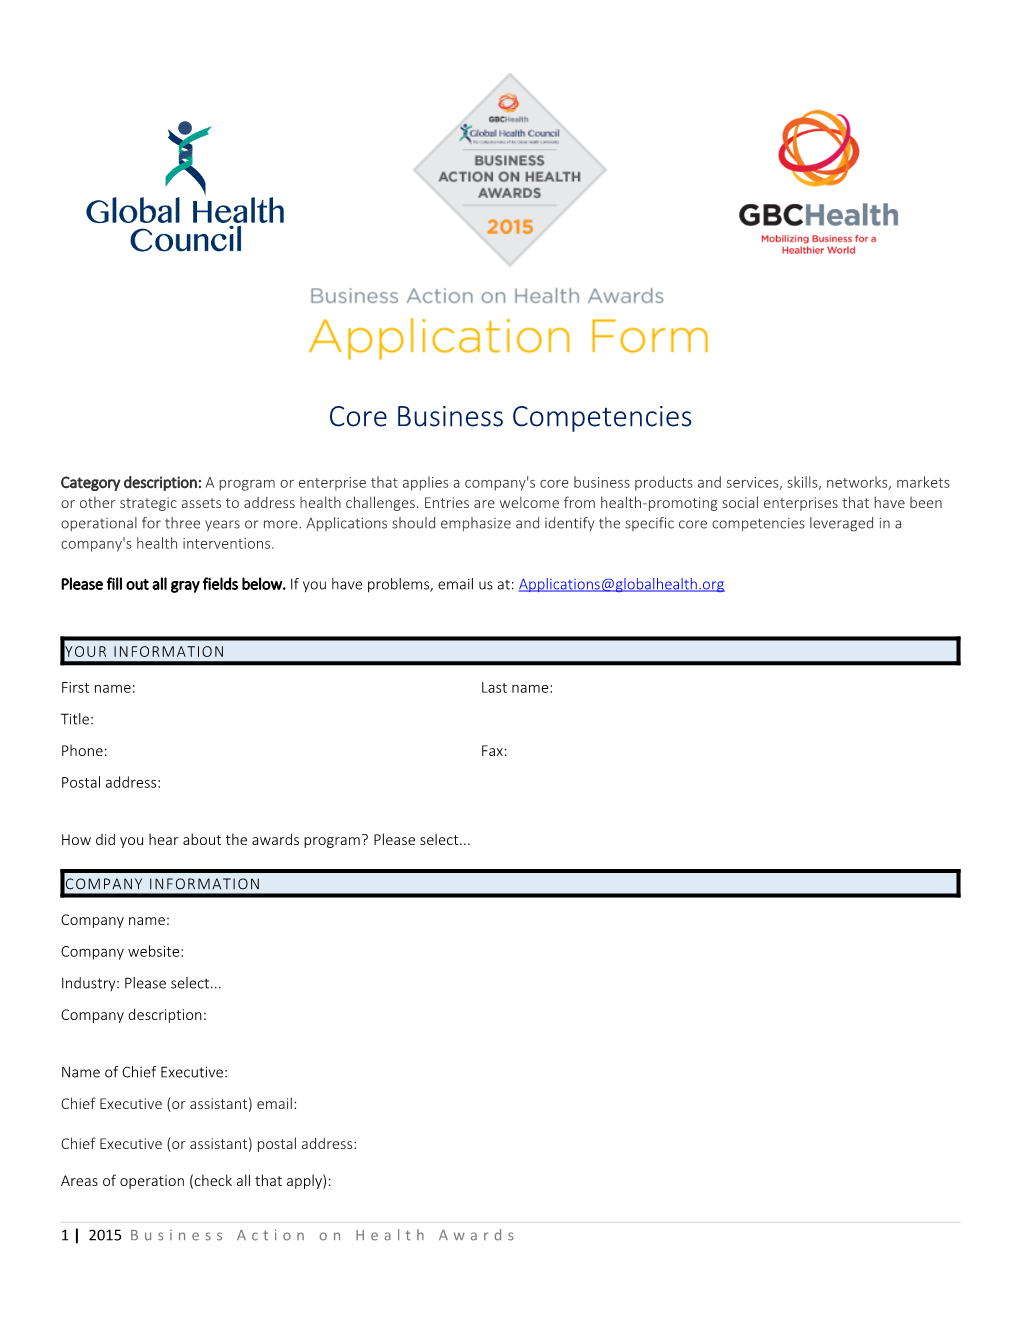 Please Fill out All Gray Fields Below. If You Have Problems, Email Us At